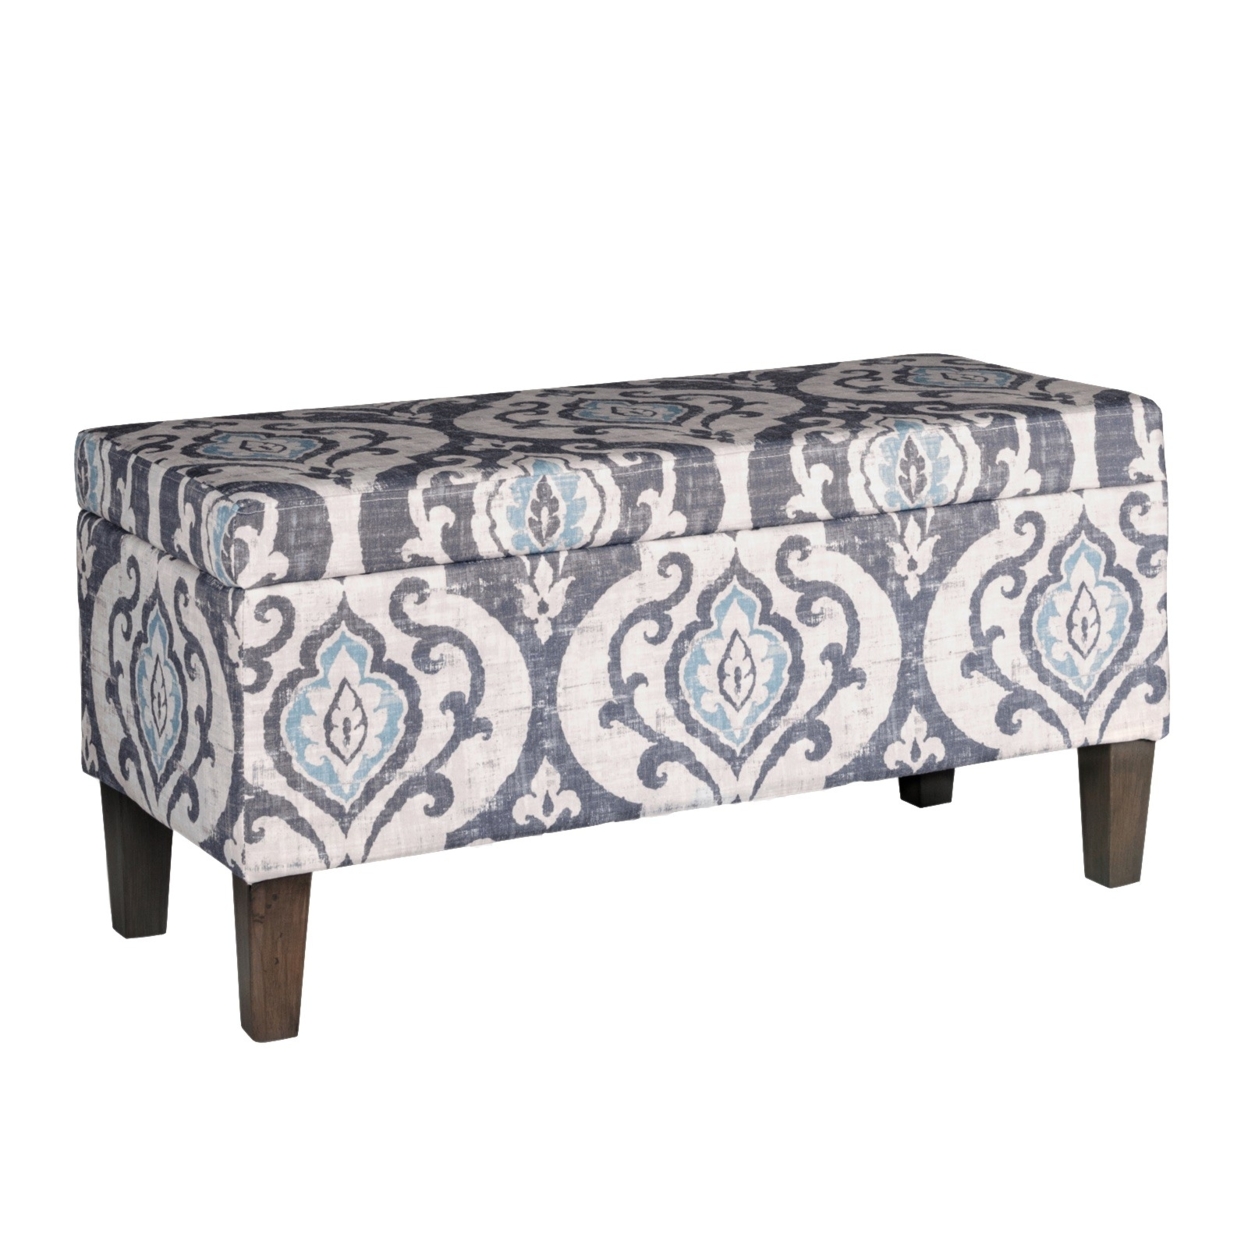 Damask Patterned Fabric Upholstered Wooden Bench With Hinged Storage, Large, Multicolor- Saltoro Sherpi